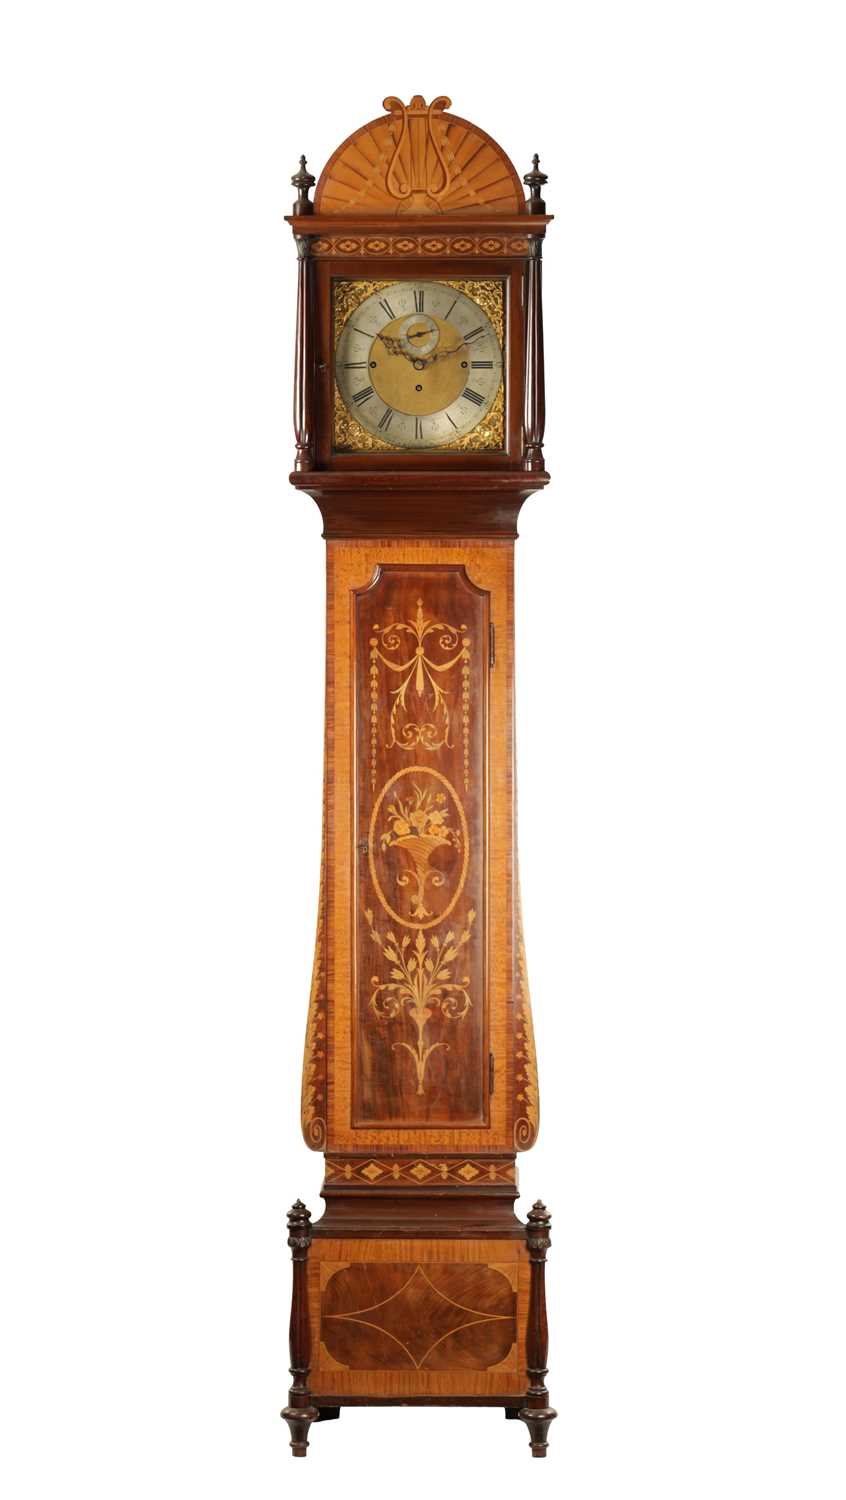 Lot 1295 - MAPLE AND CO, LONDON. A LATE NINETEENTH CENTURY THREE TRAIN MUSICAL LONGCASE CLOCK, IN THE SHERATON REVIVAL TASTE